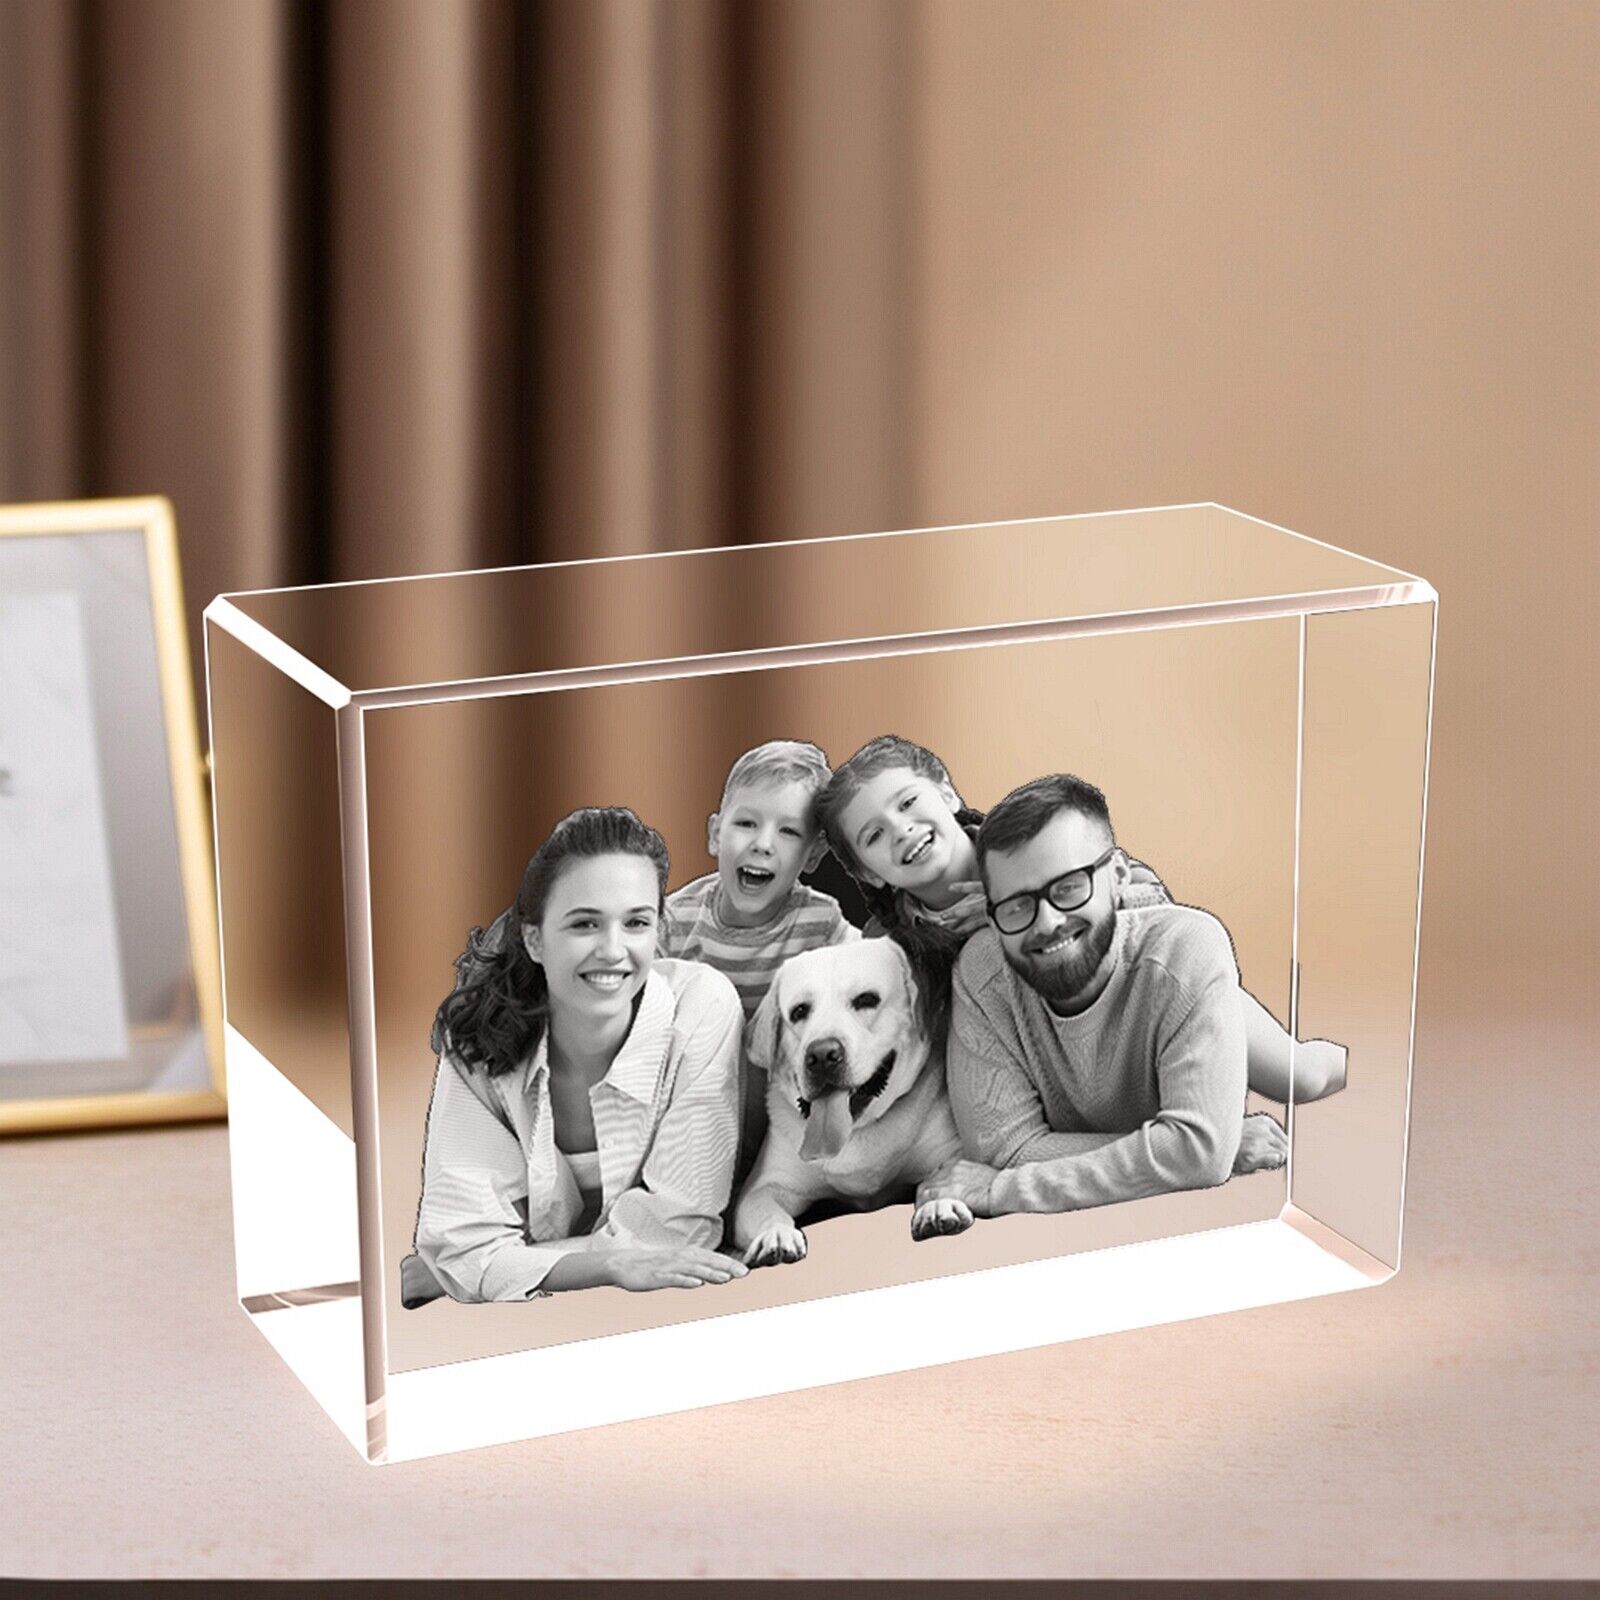 Personalized 3D Crystal Photo Gift For Birthday Anniversary Mother's Day Present